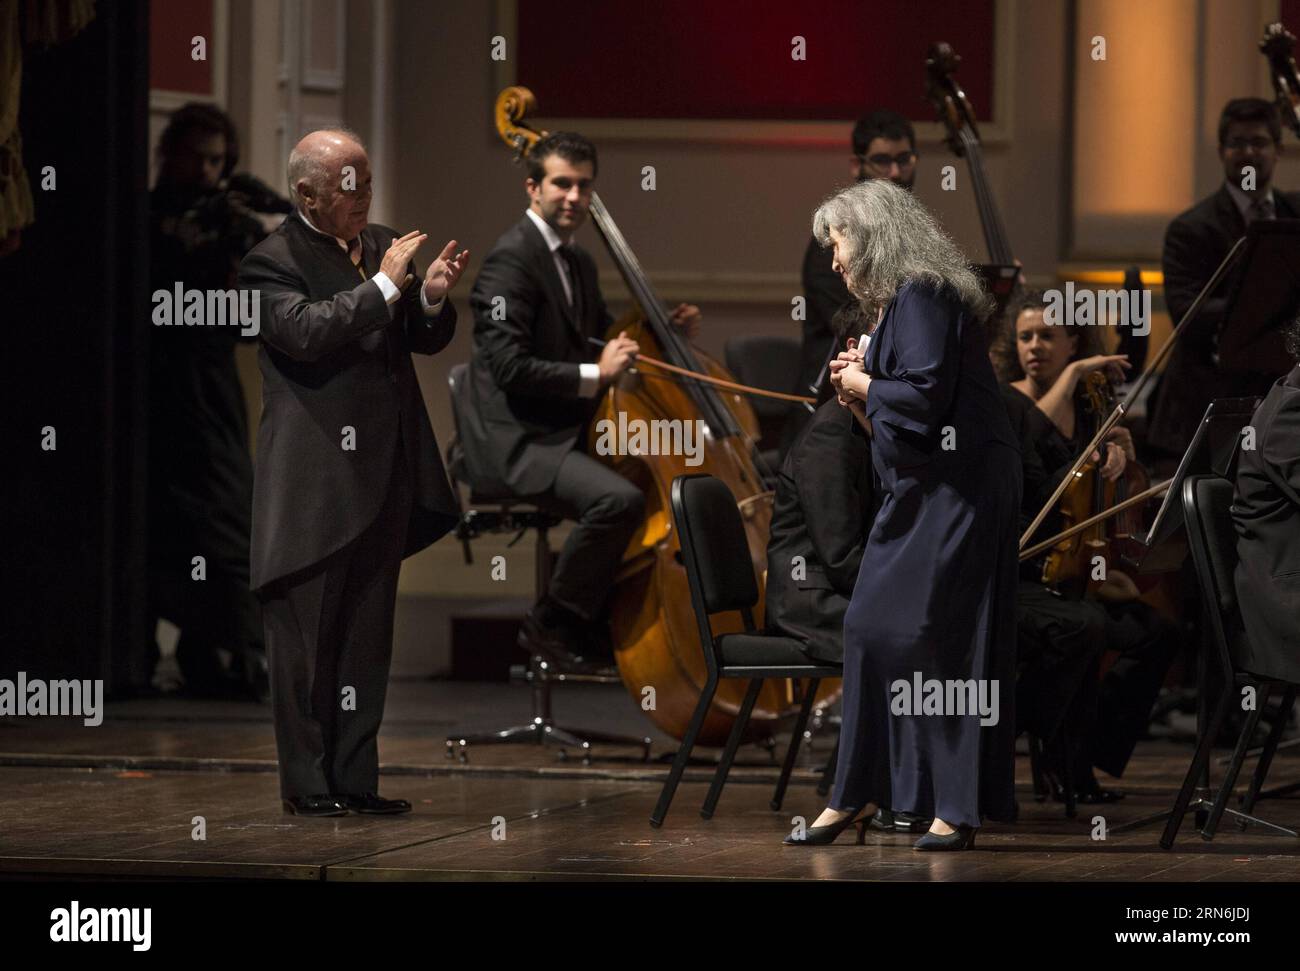 BUENOS AIRES, July 29, 2015 -- Argentinean pianist Martha Argerich R responds to the applause from Daniel Barenboim L, Argentinean Musician and orchestra conductor, during a concert held with the West-Eastern Divan Orchestra at the Colon Theater, in Buenos Aires, capital of Argentina, July 29, 2015.  jp ARGENTINA-BUENOS AIRES-MUSIC-CONCERT MARTINxZABALA PUBLICATIONxNOTxINxCHN Stock Photo